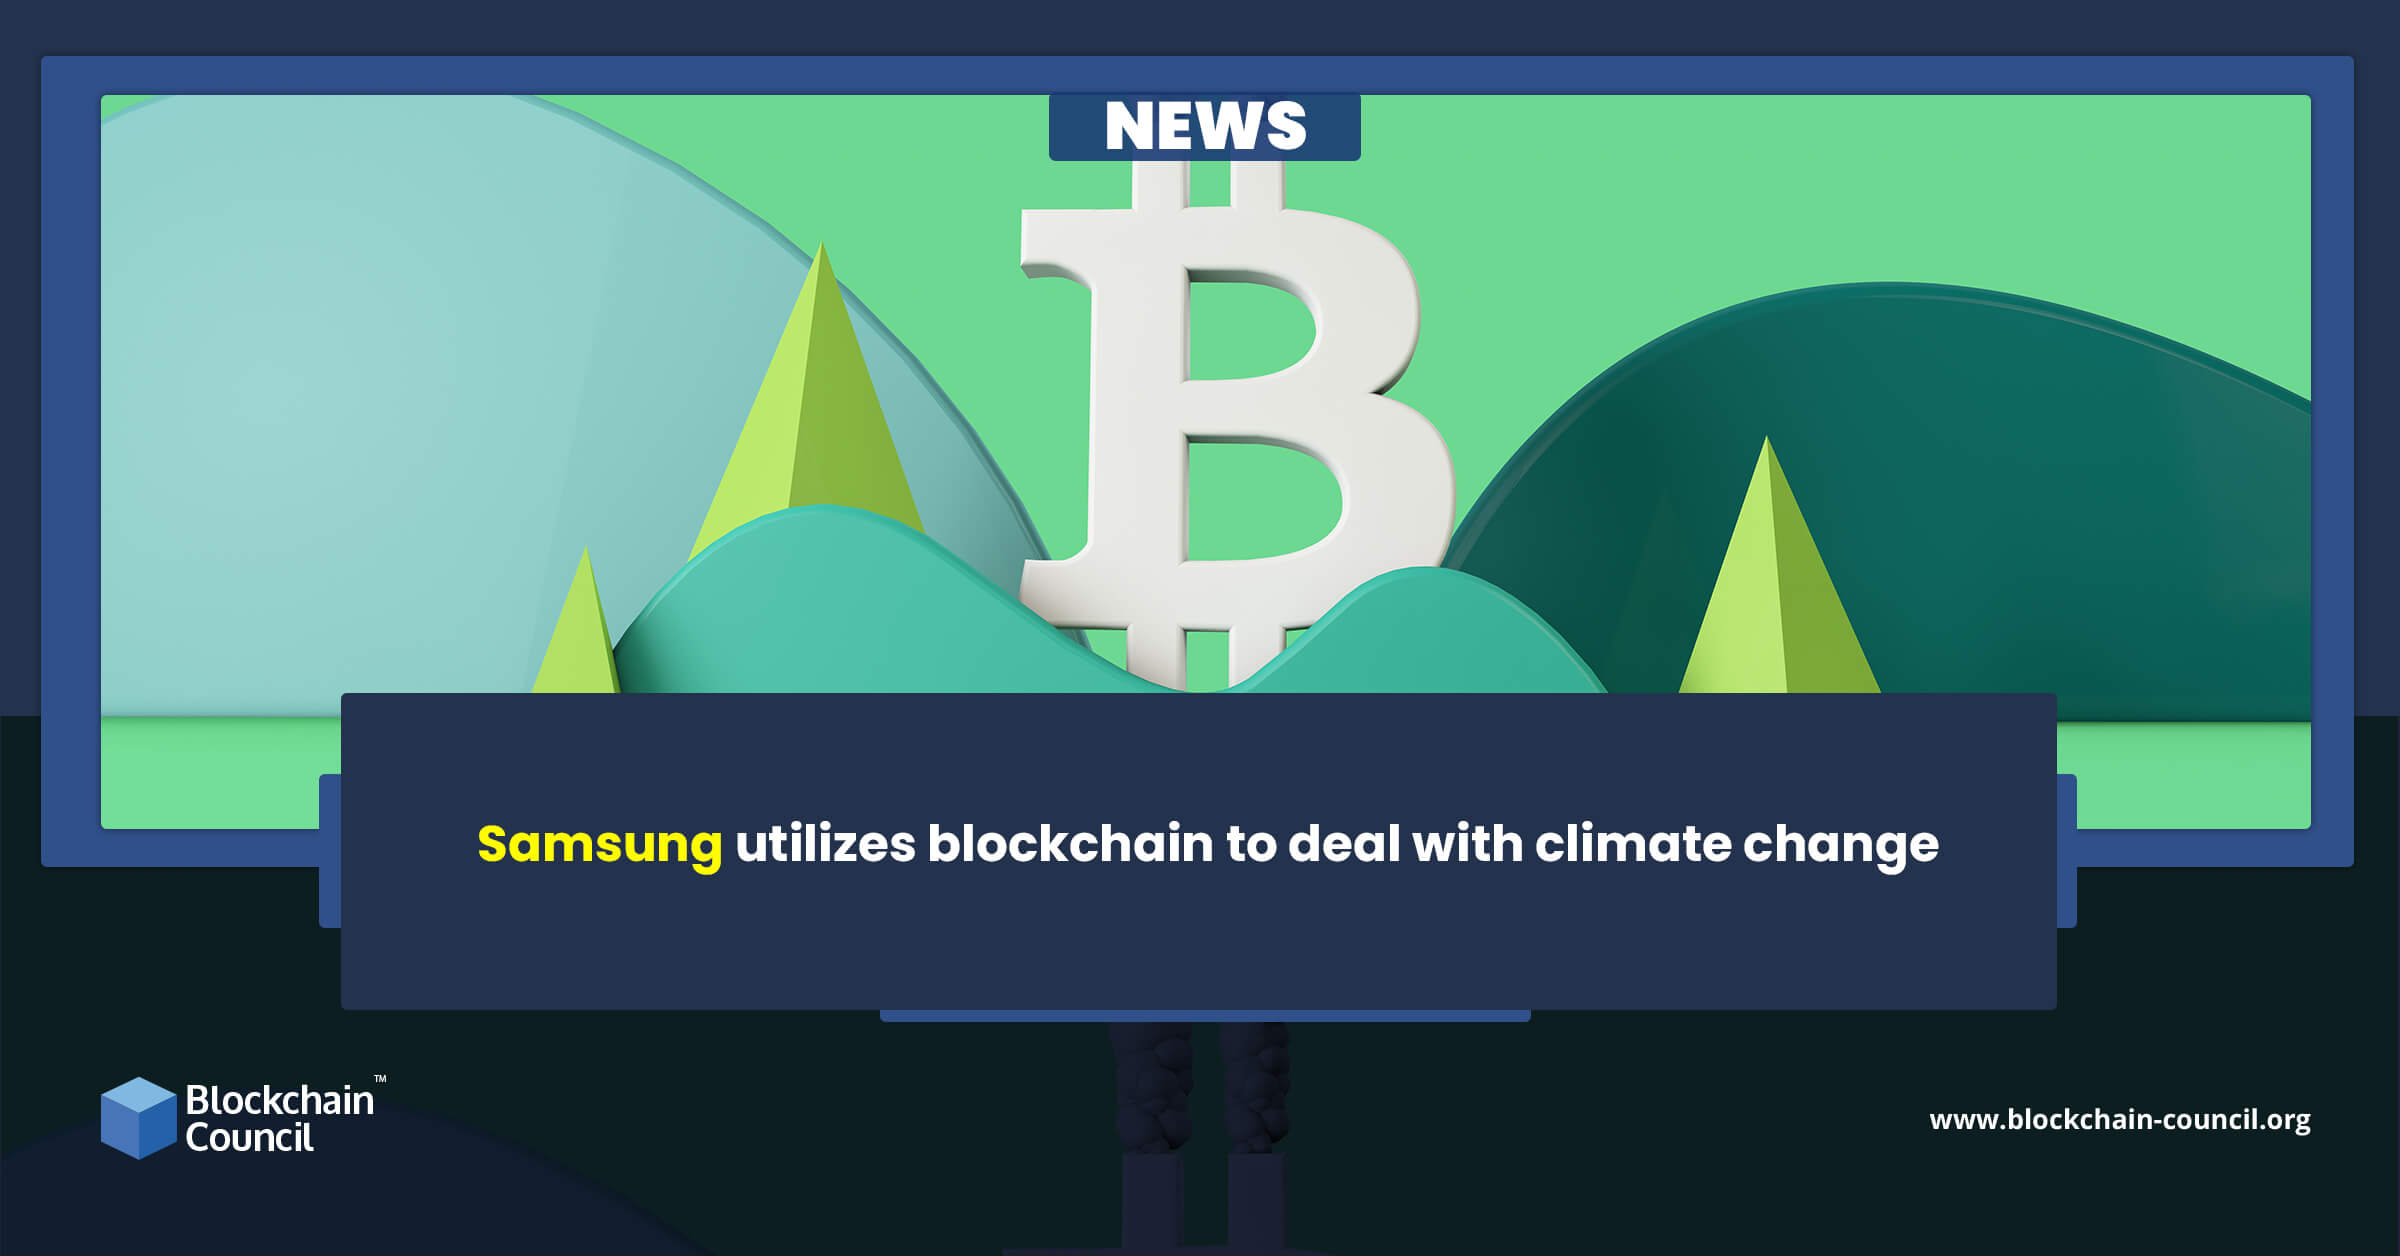 Samsung utilizes blockchain to deal with climate change